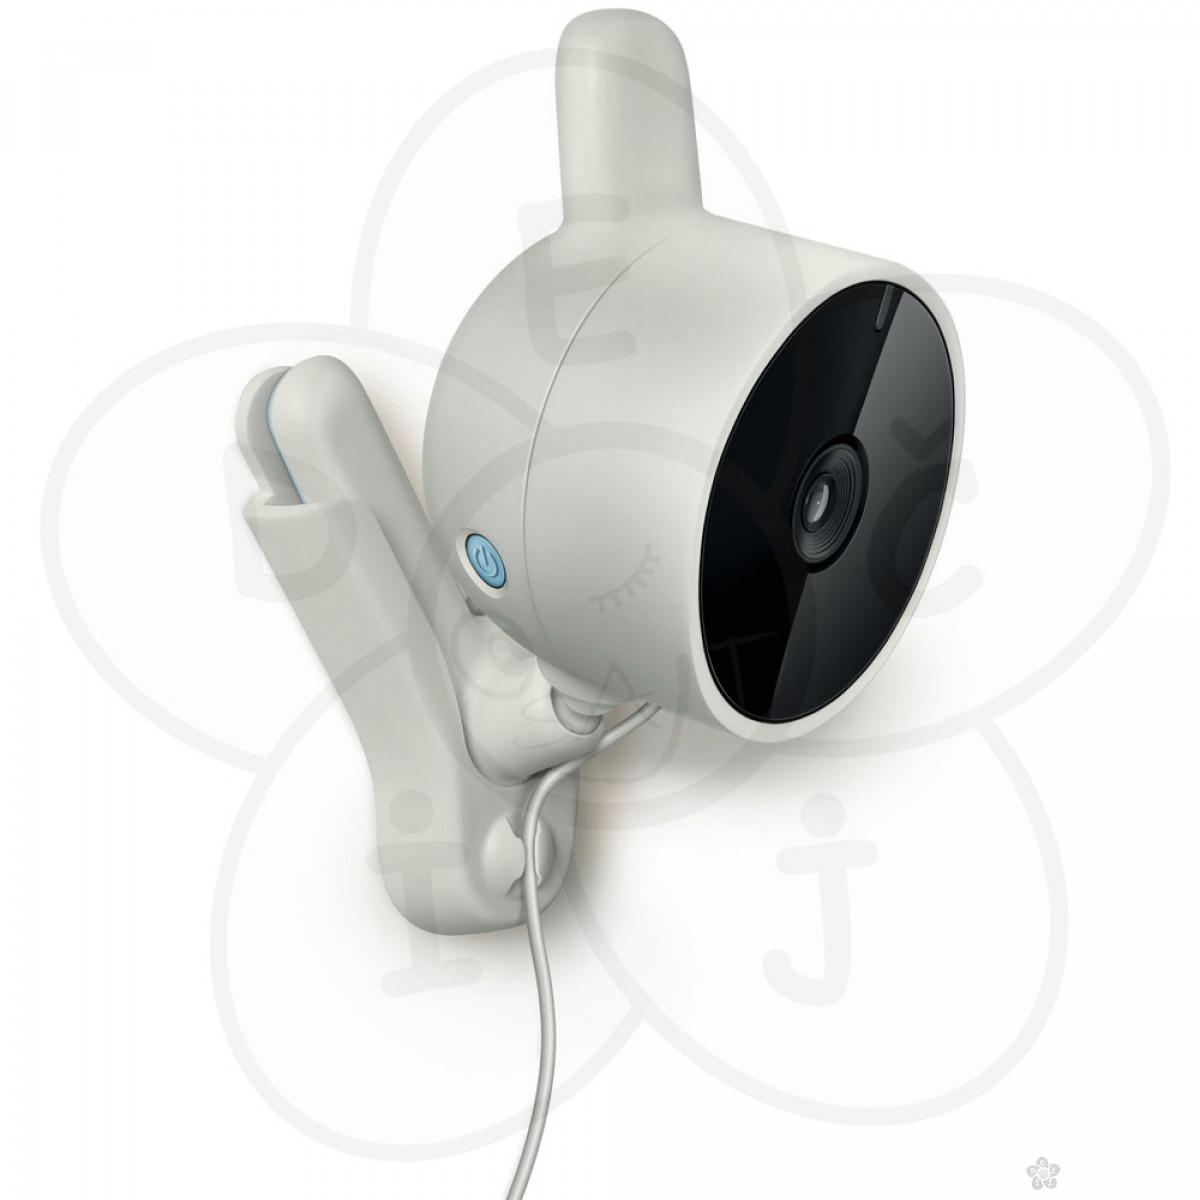 AVENT VIDEO BABY MONITOR 